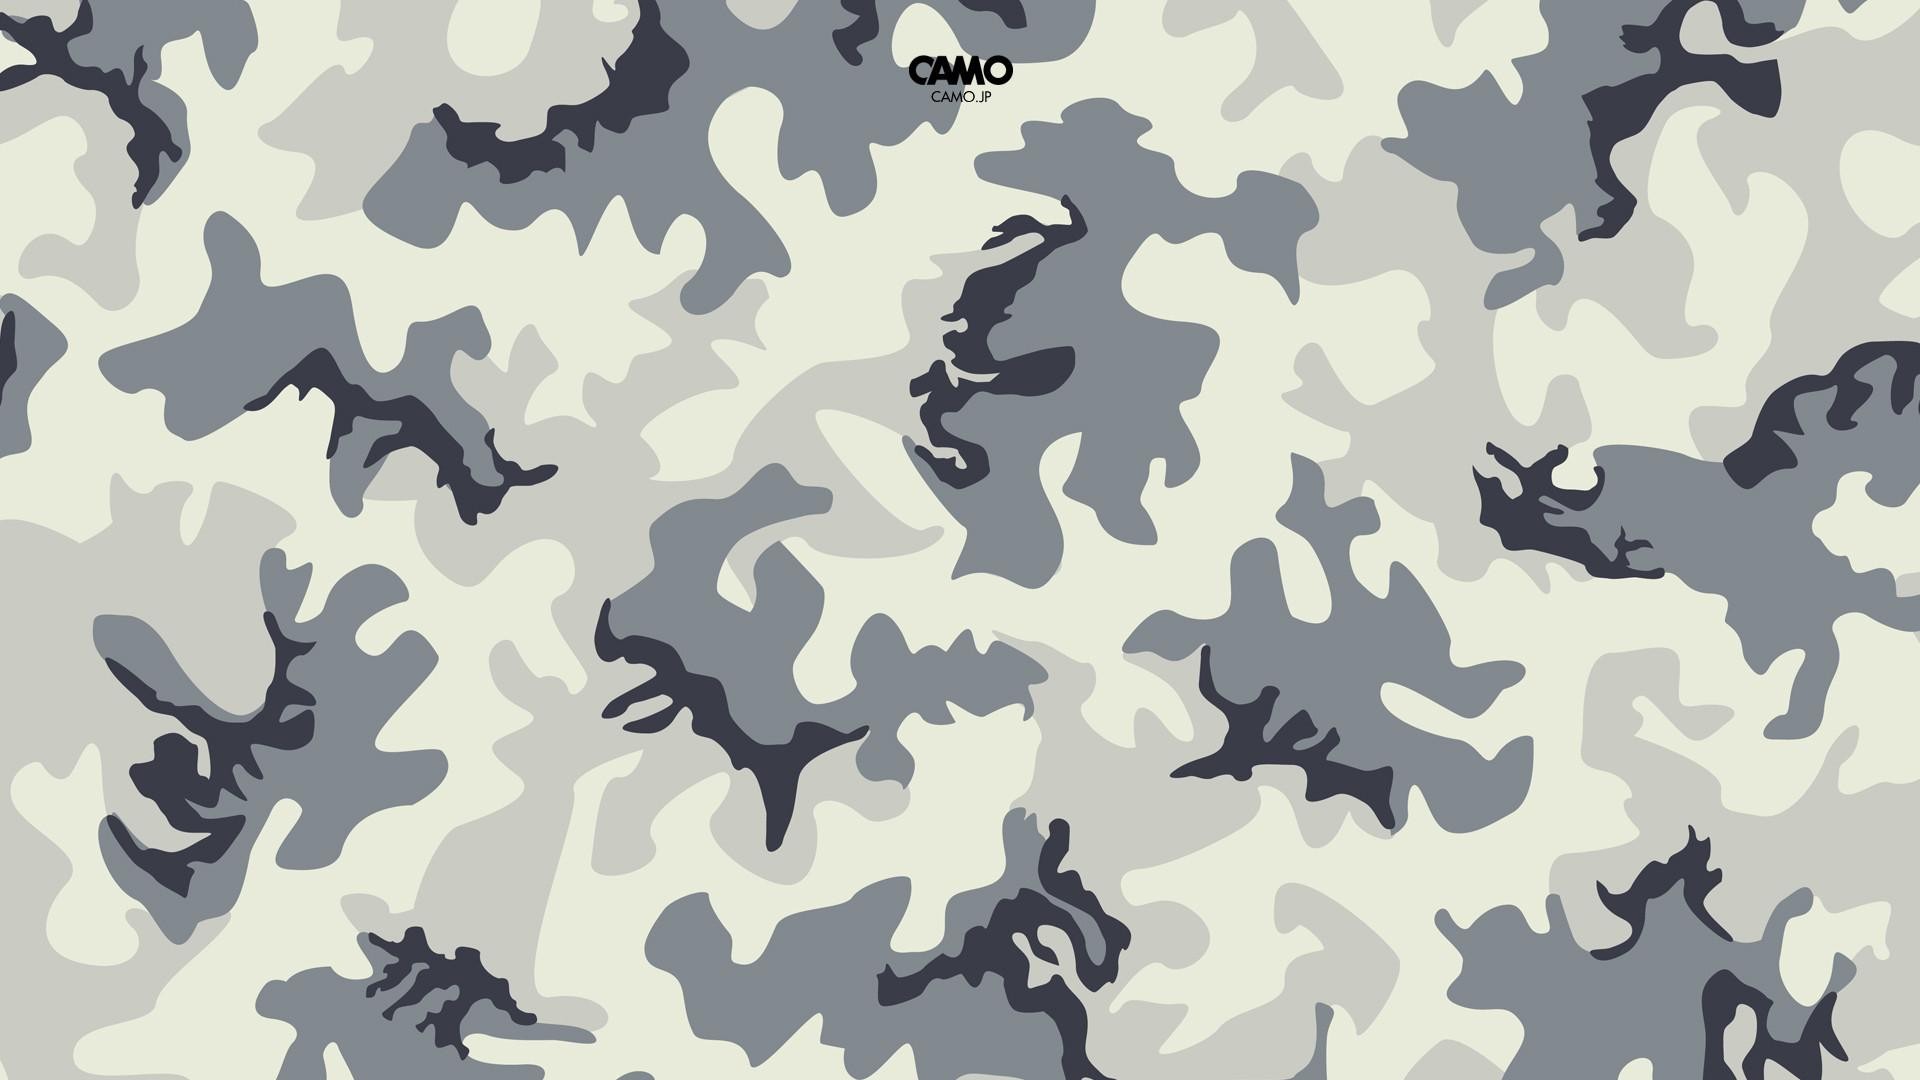 camouflage wallpaper,military camouflage,pattern,camouflage,uniform,design